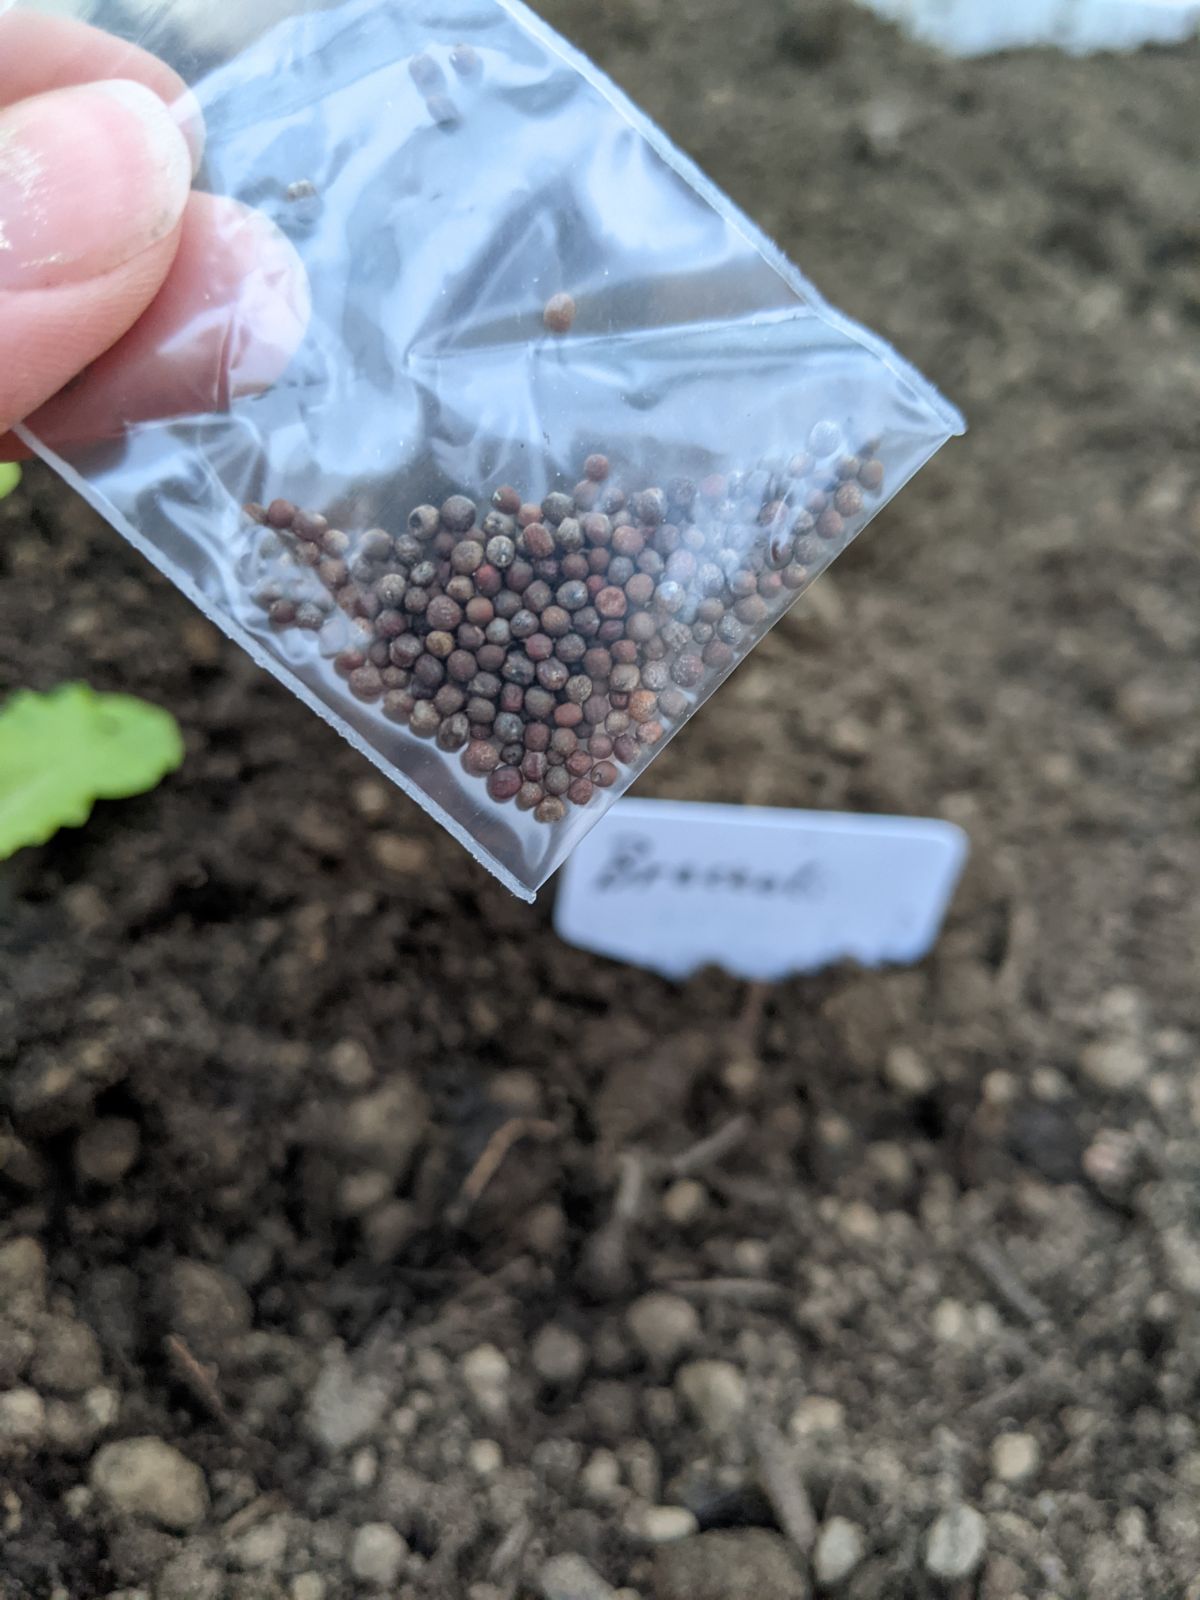 Bag of broccoli seeds above a "Broccoli" plant tag in the garden